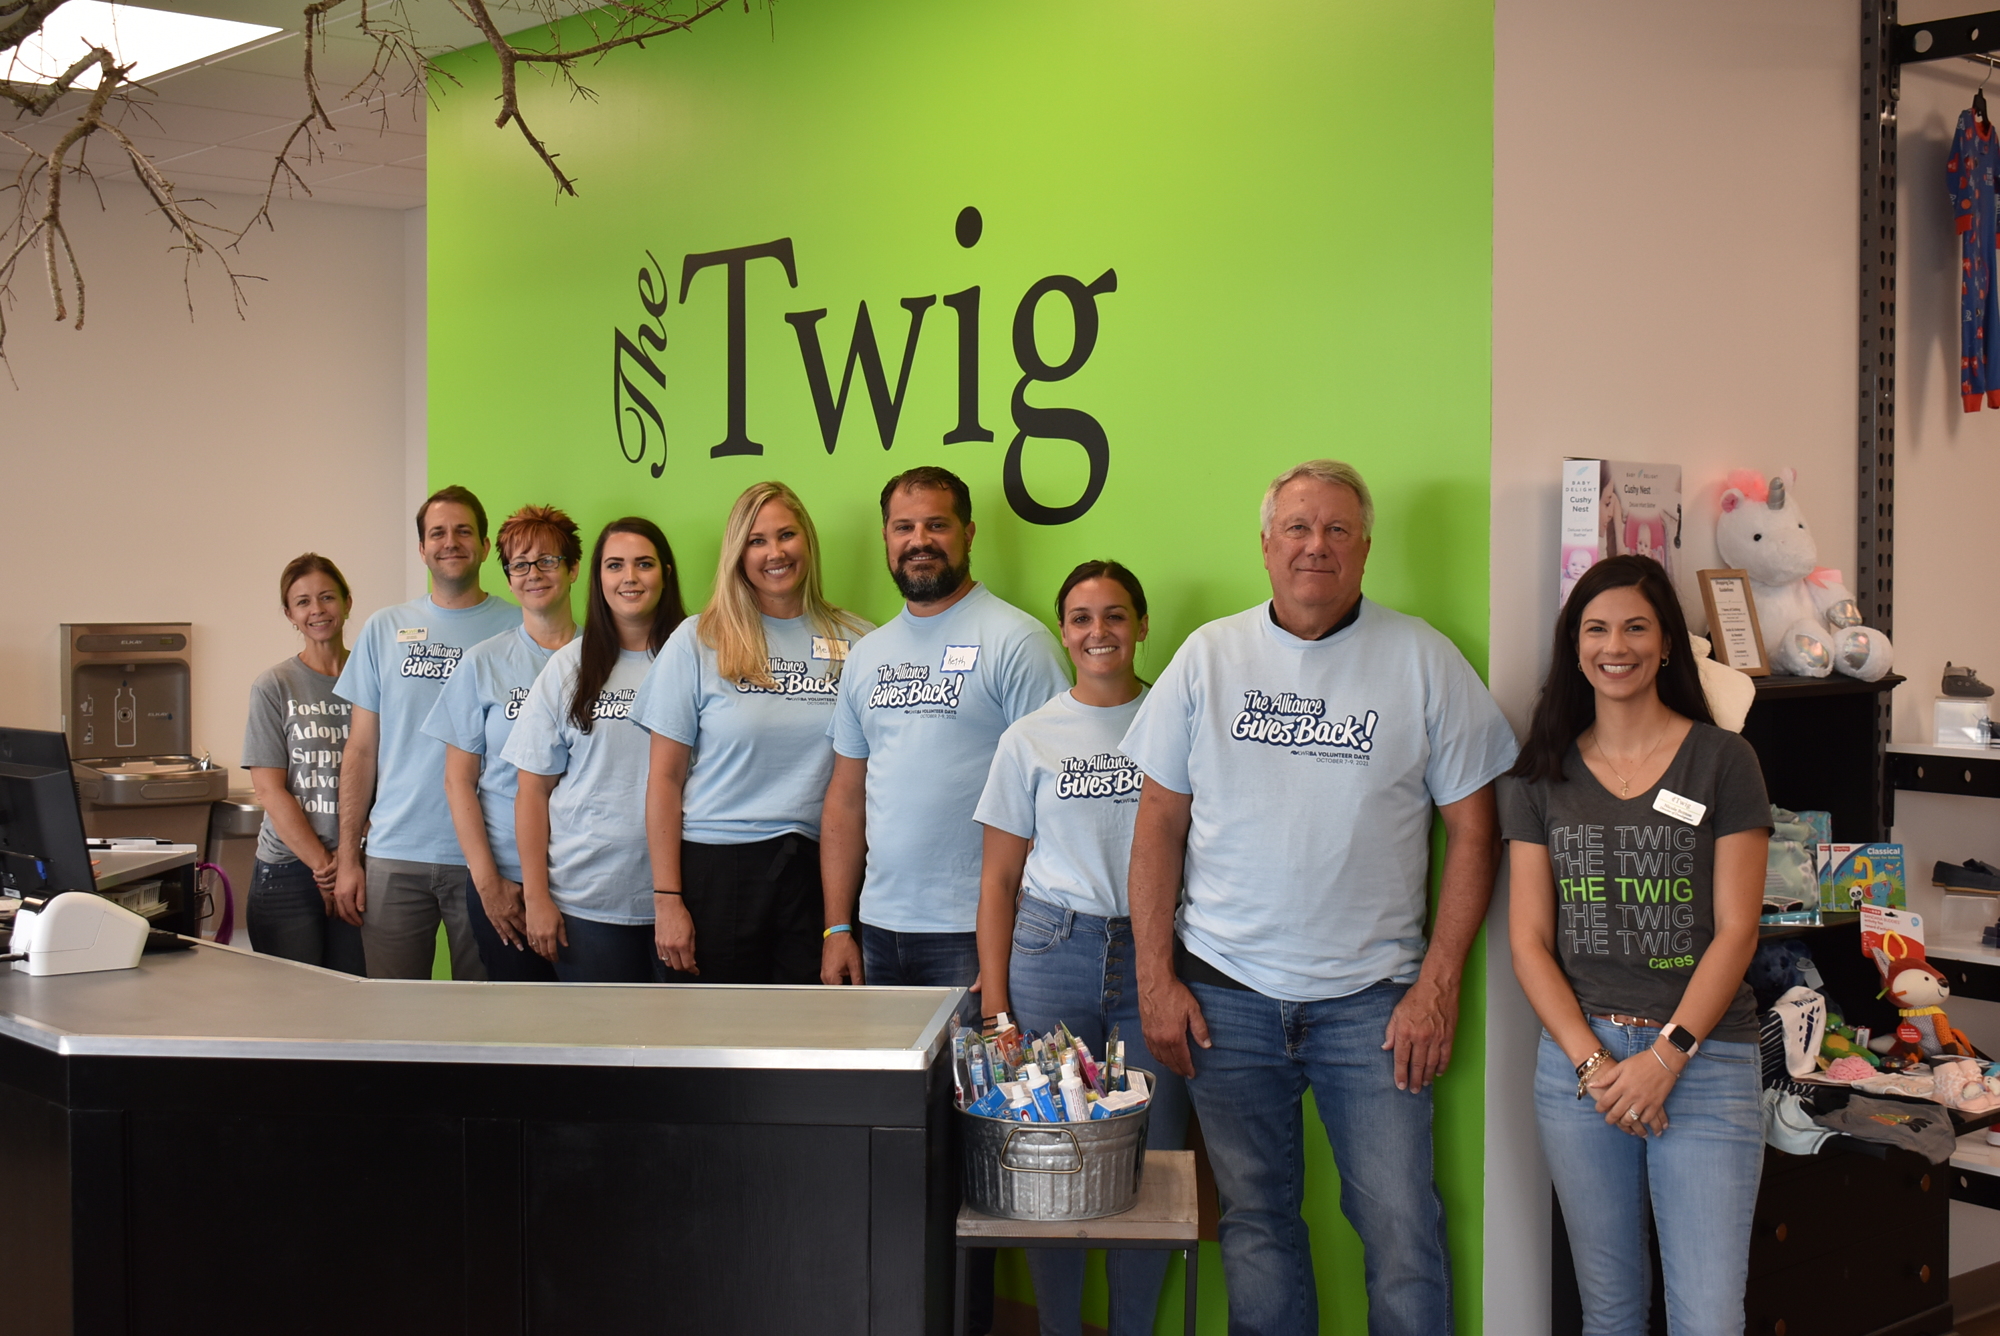 A group of seven volunteers from the Lakewood Ranch Business Alliance helped sort donations and restock racks at The Twig on Thursday. The Twig allows foster children to shop for clothes free of charge. Photo by Scott Lockwood.